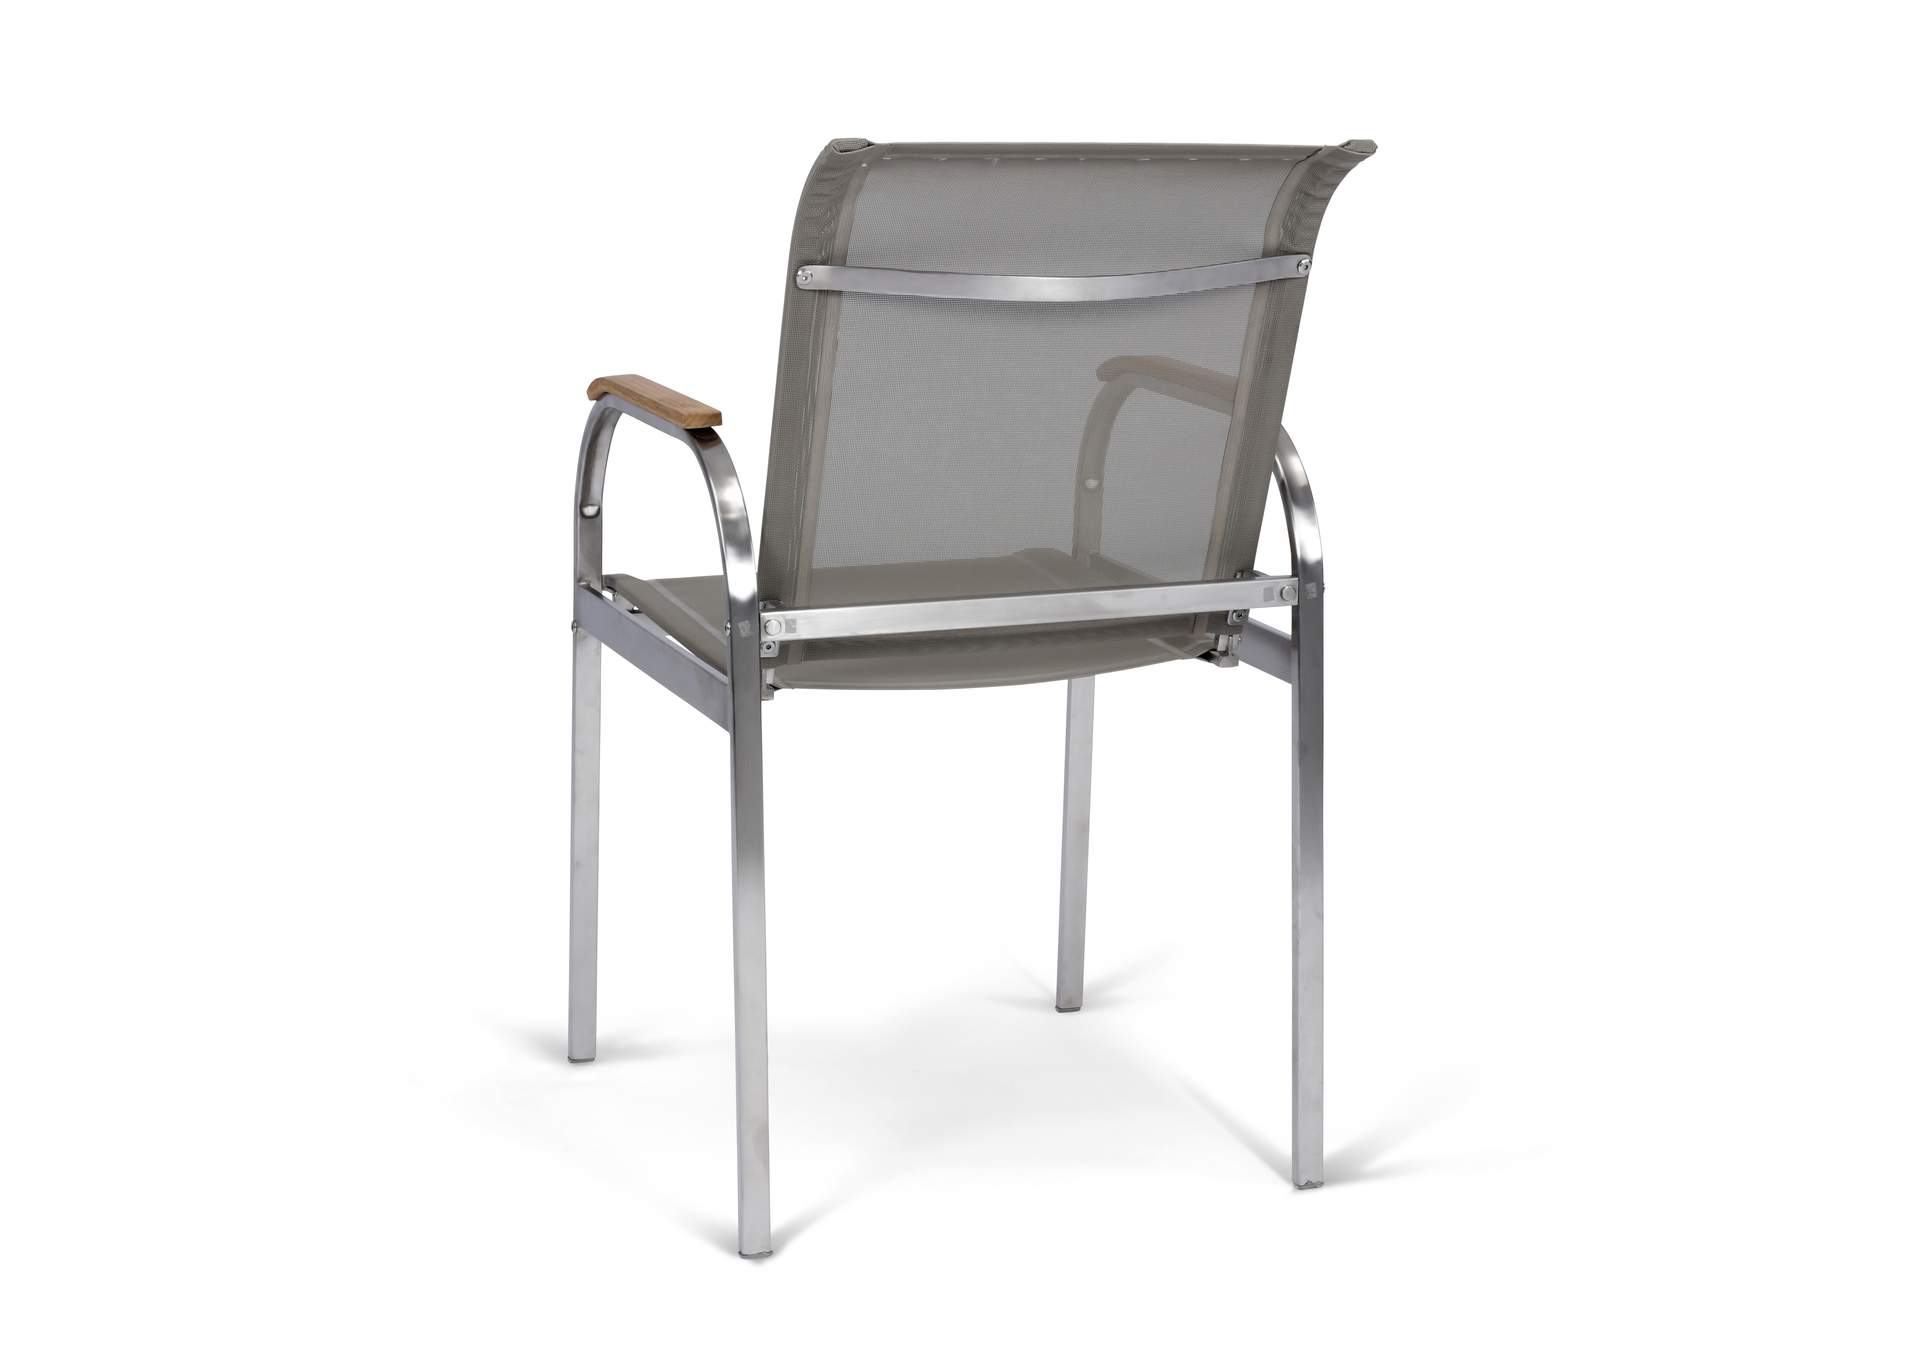 Aruba Outdoor Chair Pair By Homestyles,Homestyles